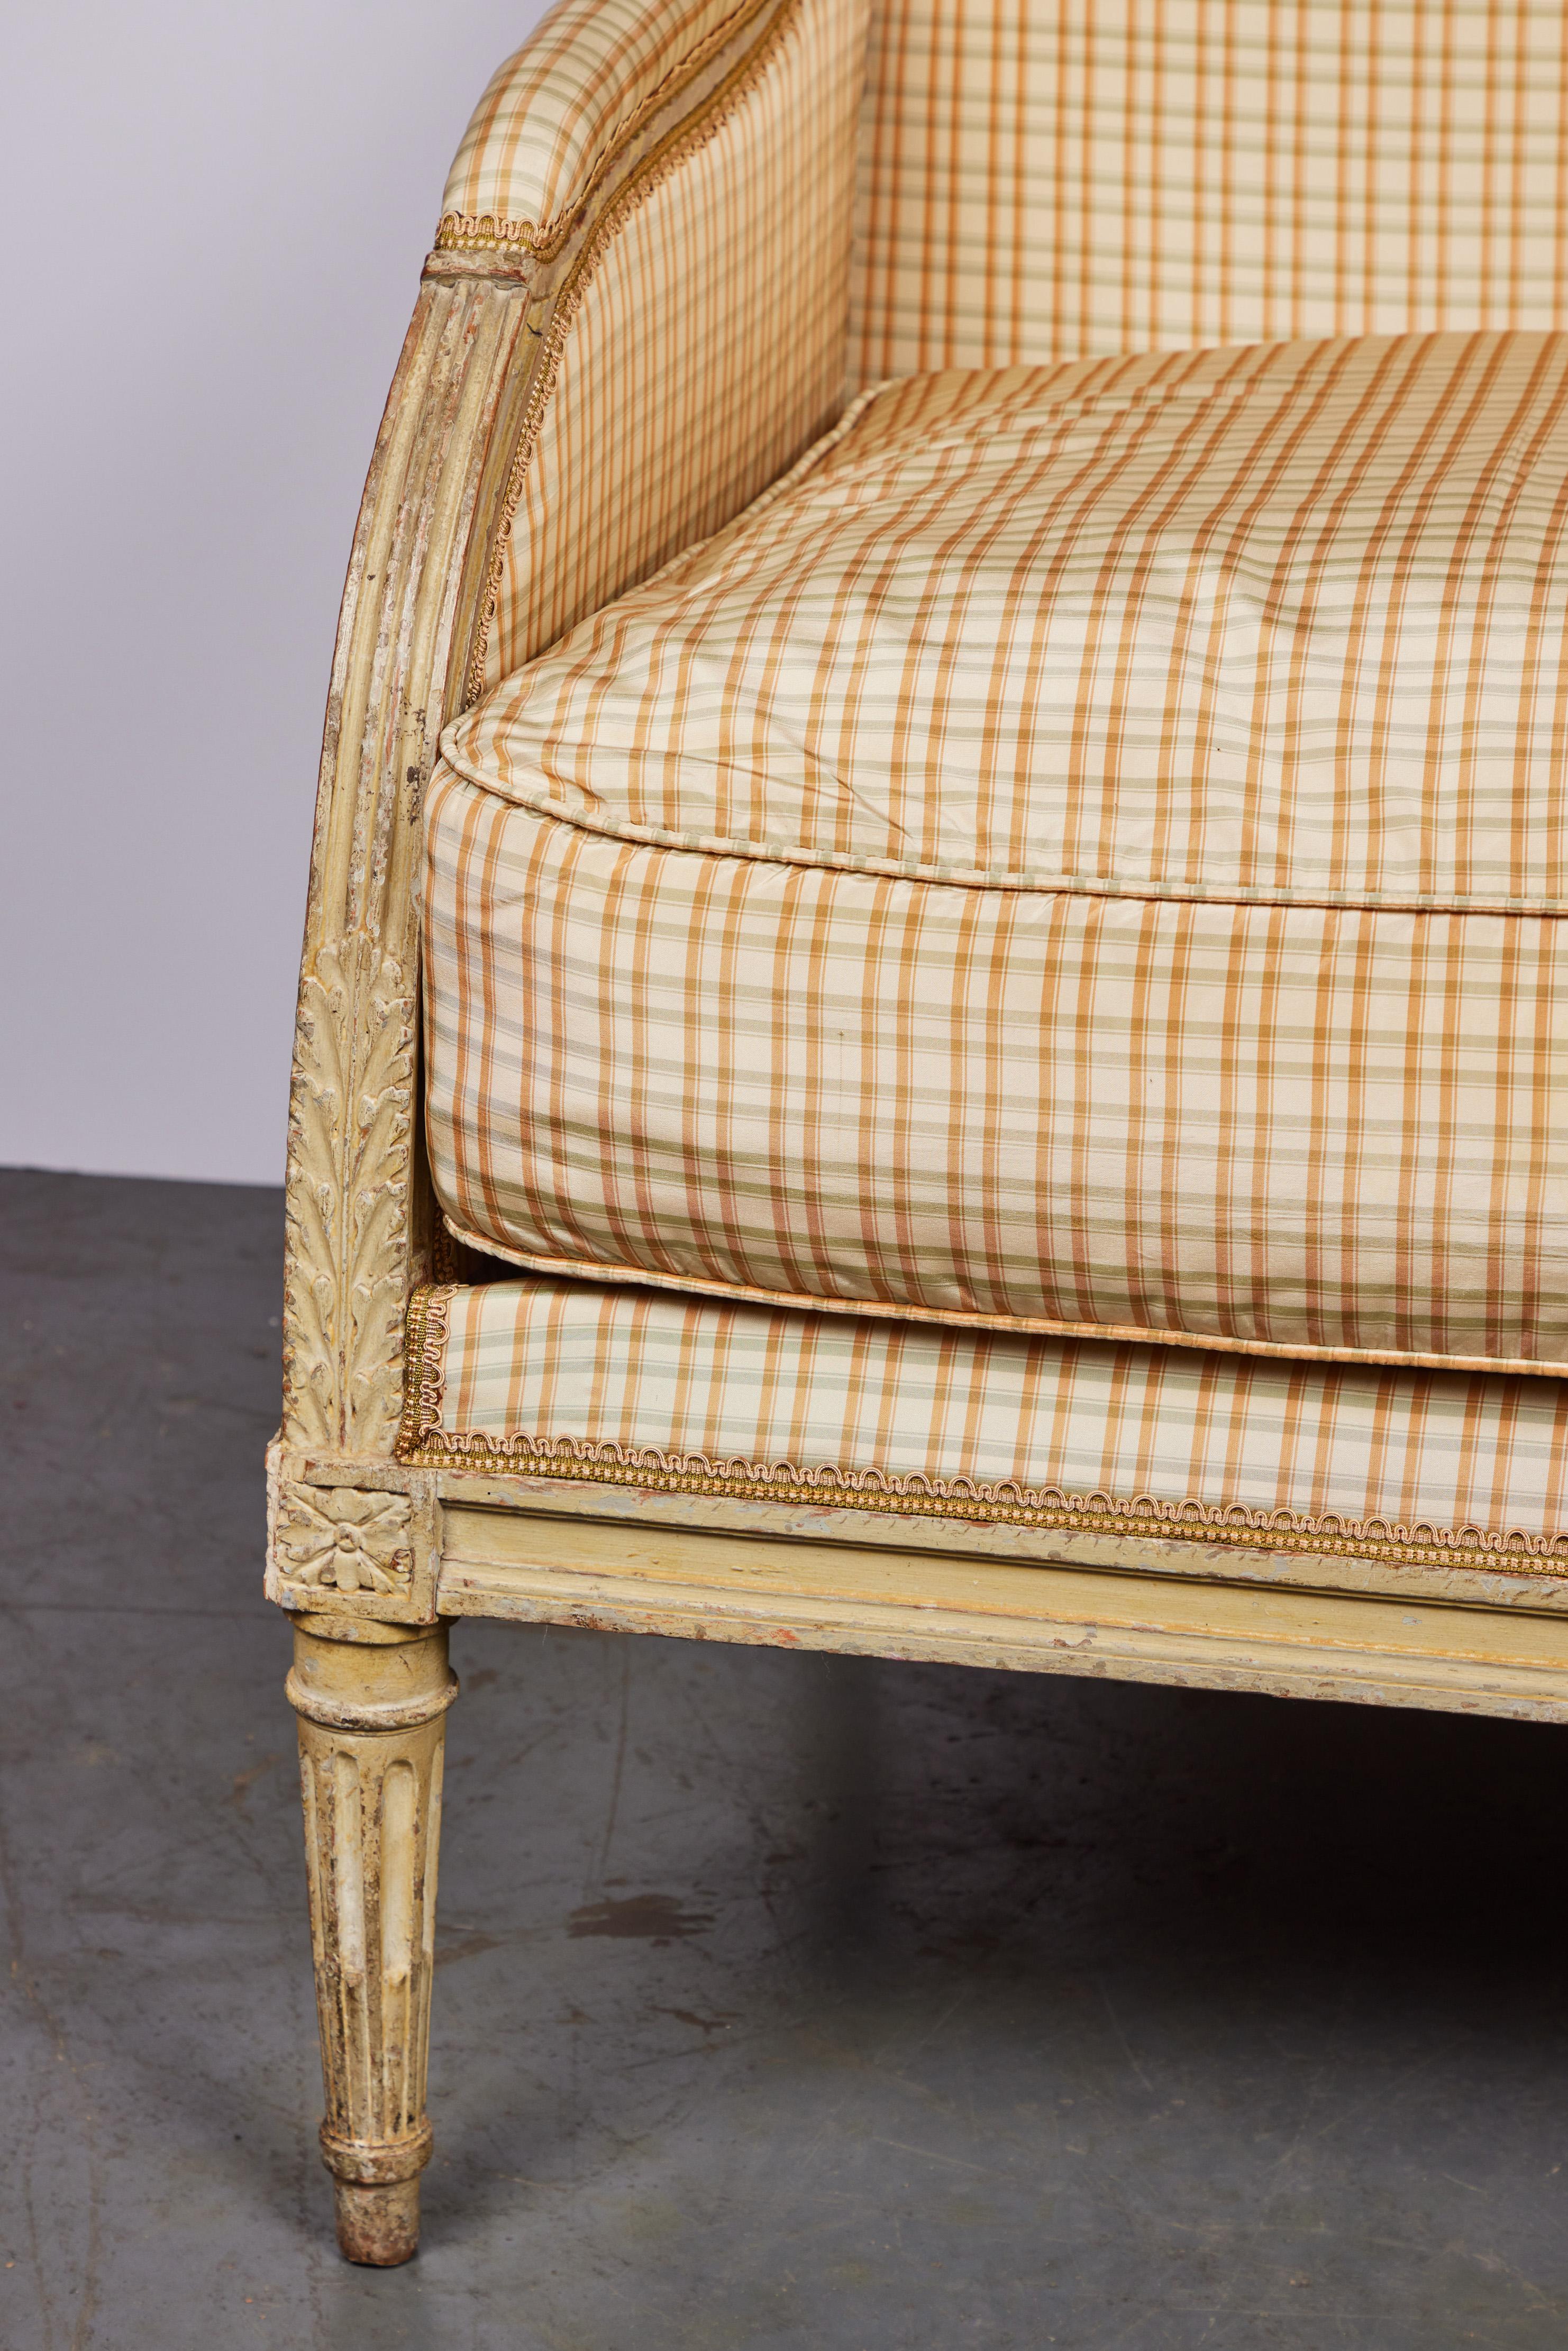 A fine, 19th century, hand-carved marquis chair with paint traces, foliate reliefs, and finished in plaid silk,  trimmed with gimping. The whole in original paint, and sitting on fluted legs.